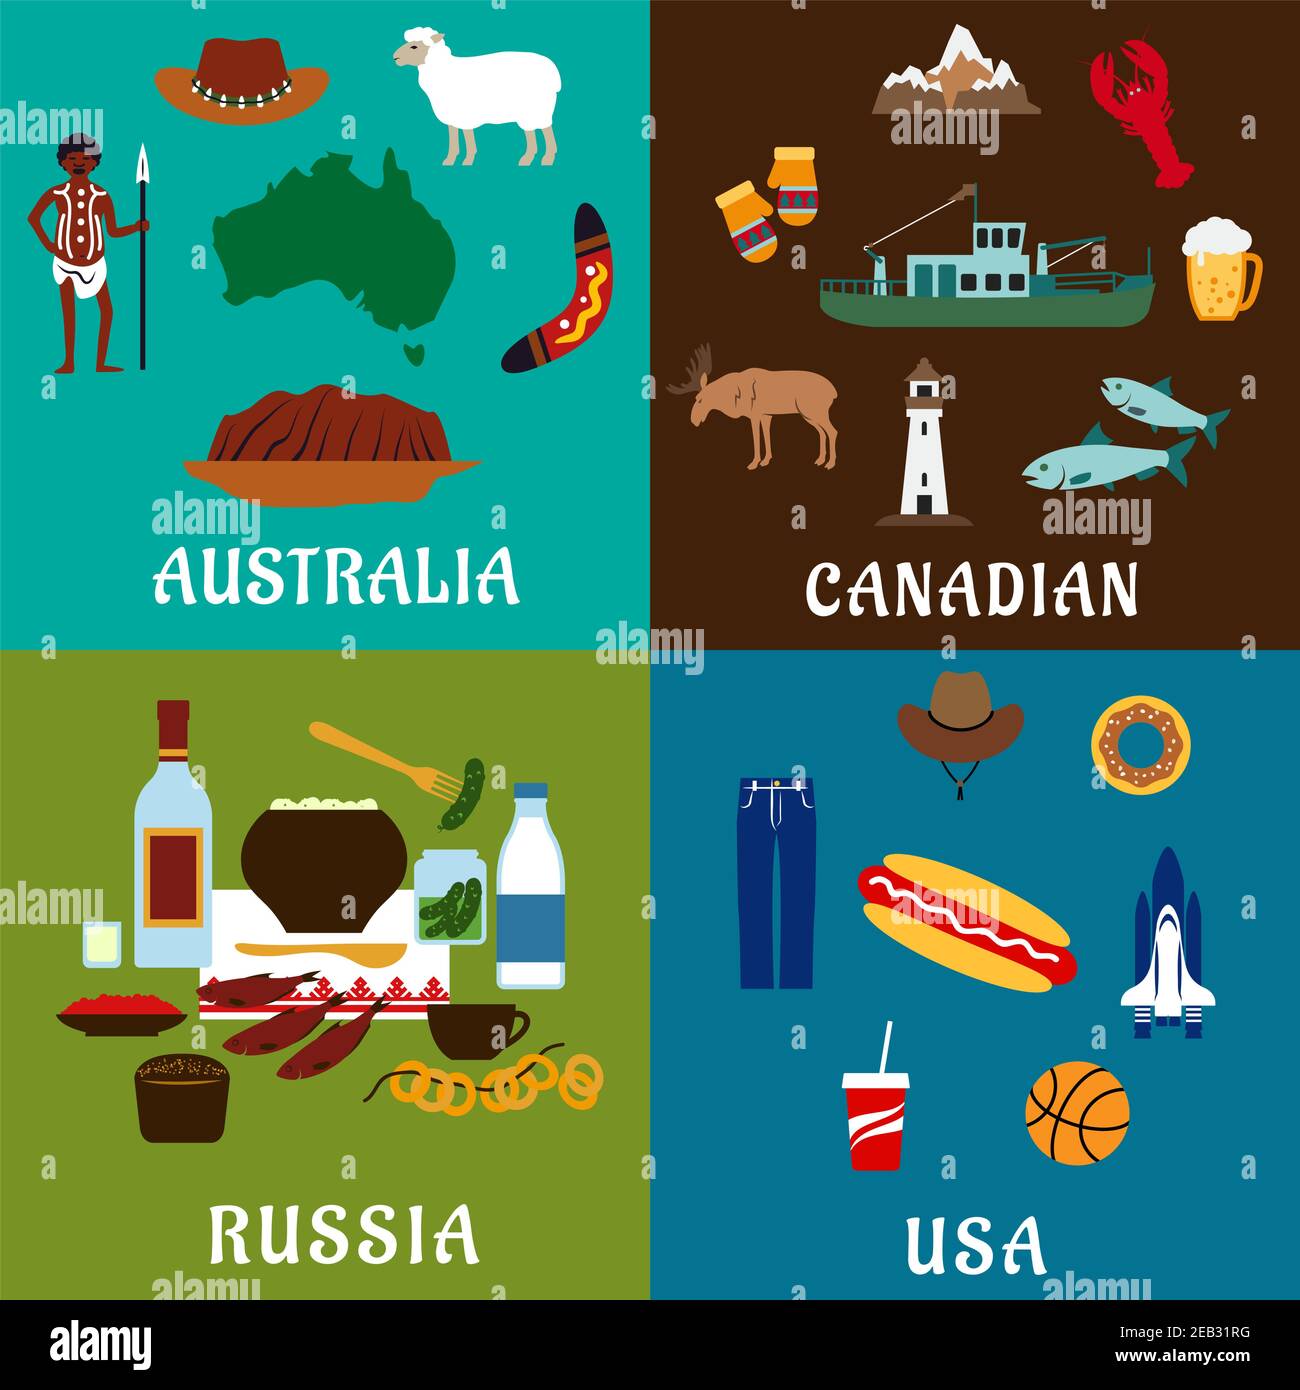 Russia, Canada, USA and Australia travel flat icons with traditional culture, history, industry, landmark, nature and national cuisine elements Stock Vector